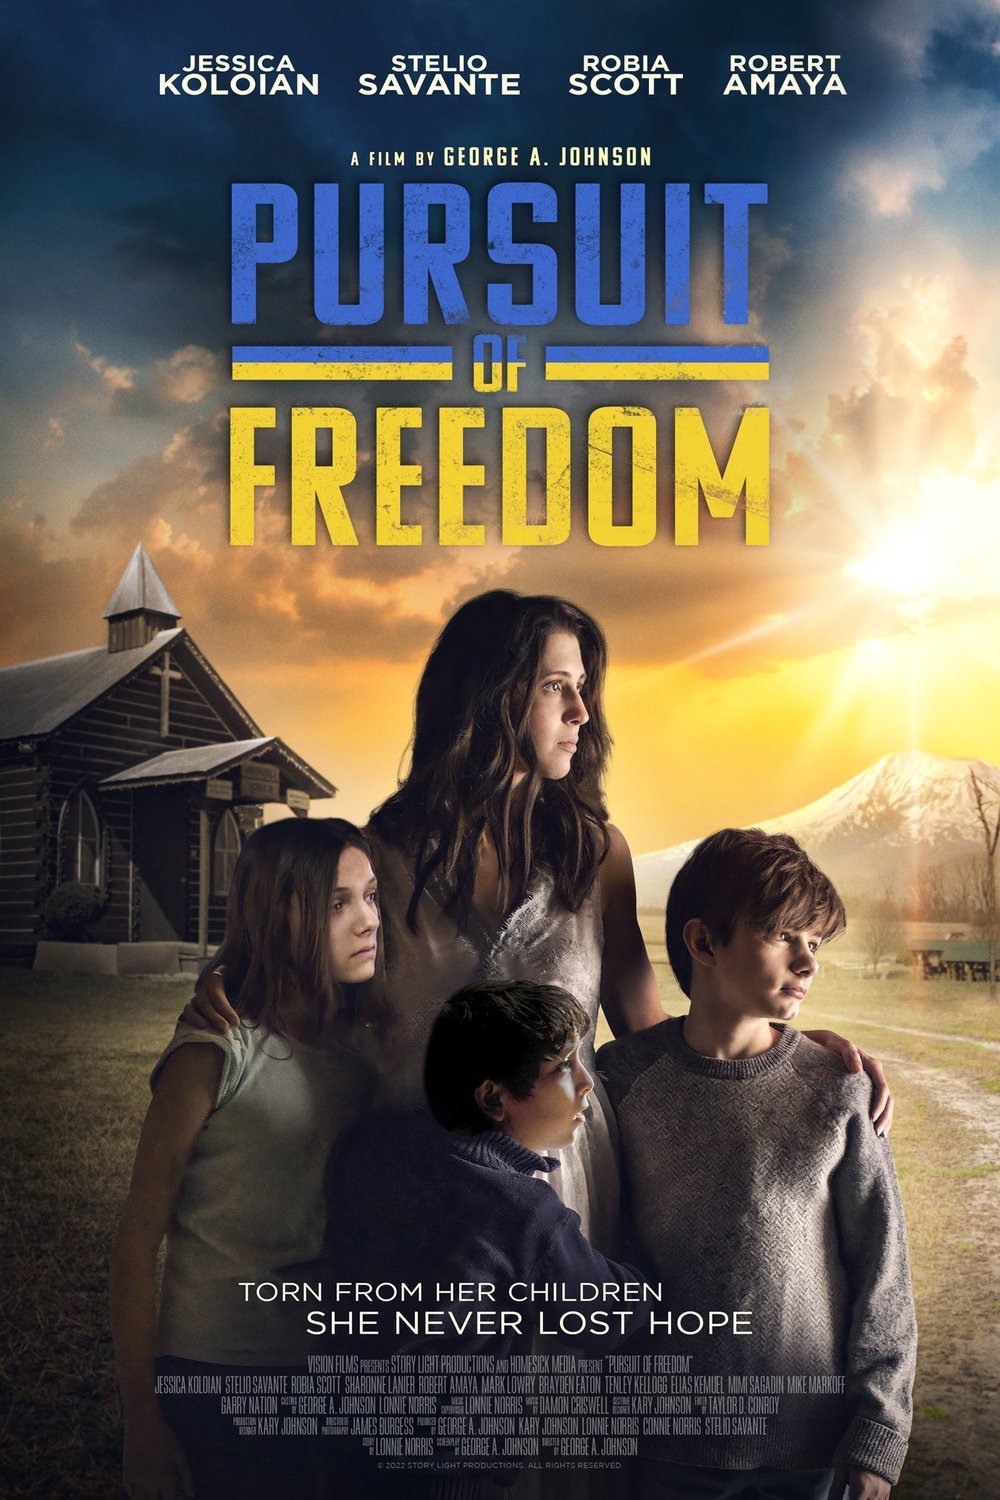 Poster of the movie Pursuit of Freedom